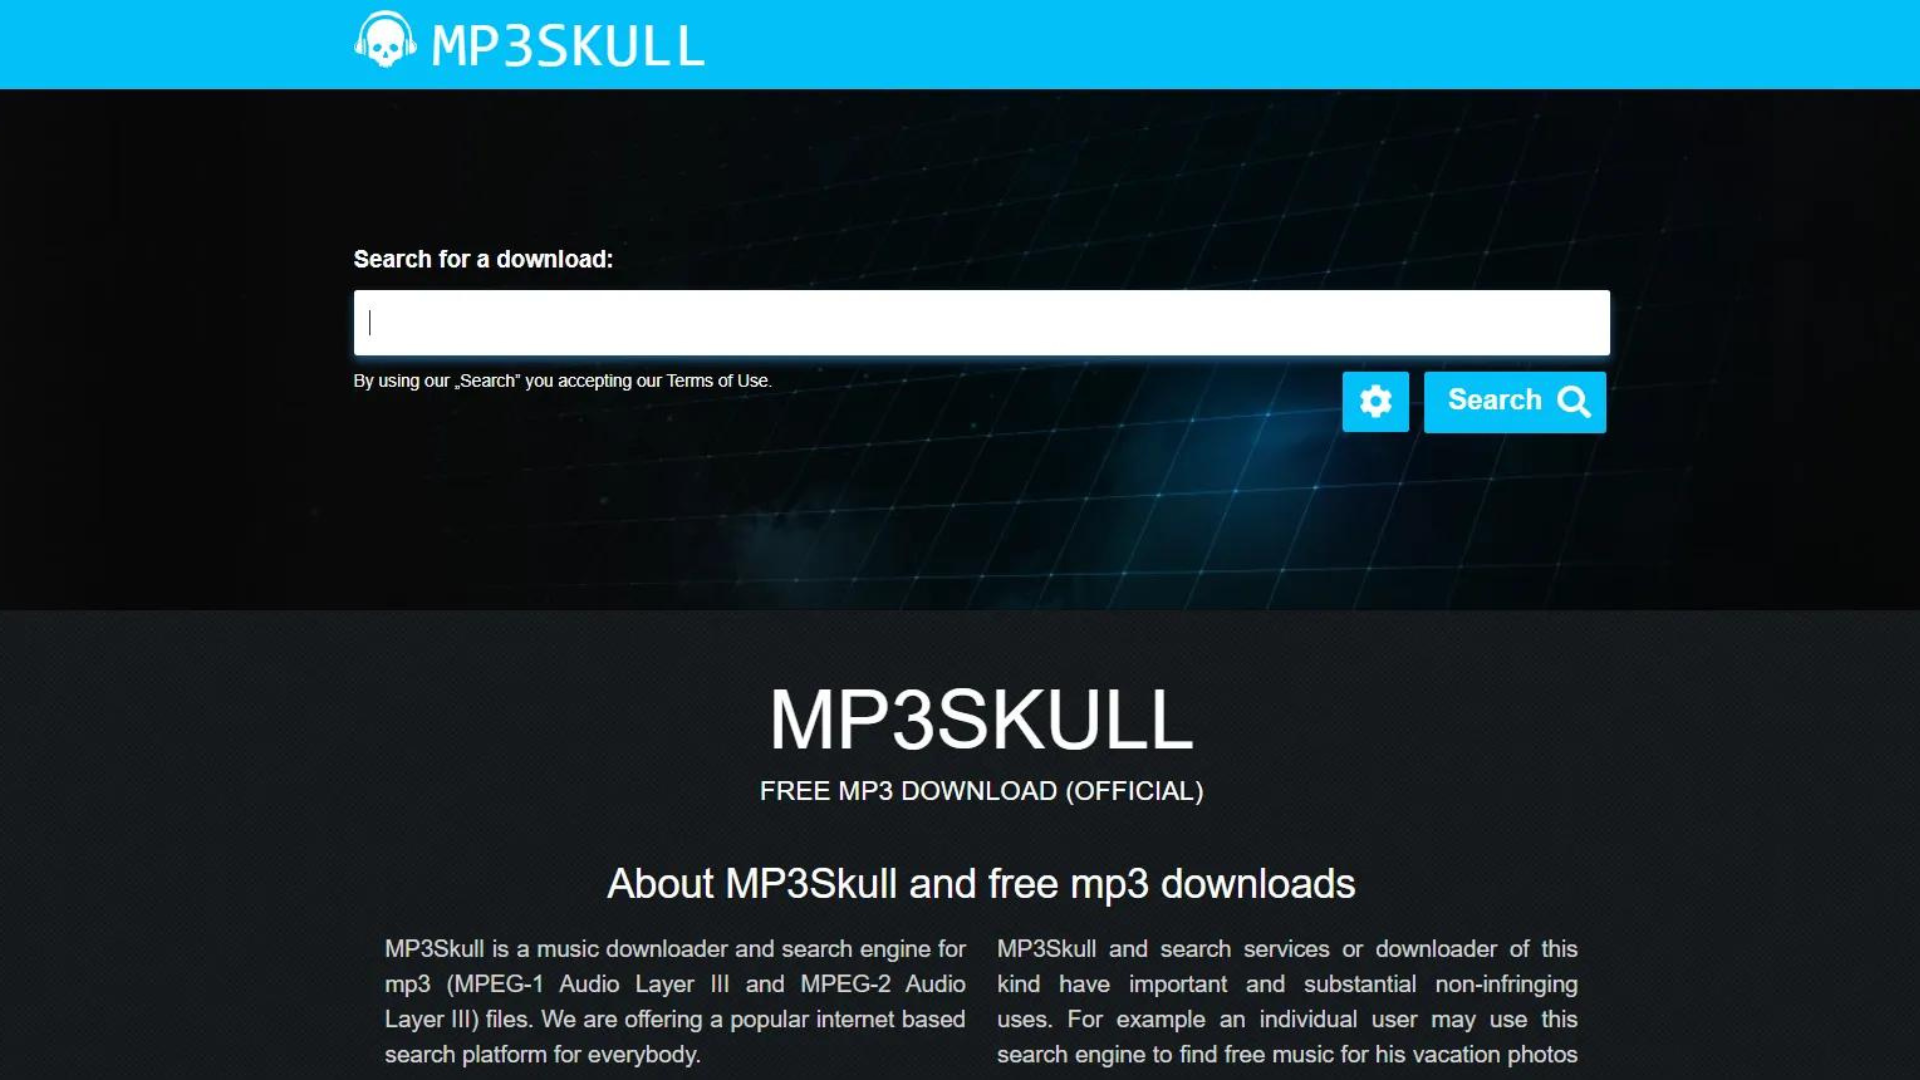 Mp3skull.com webpage with search button in the middle